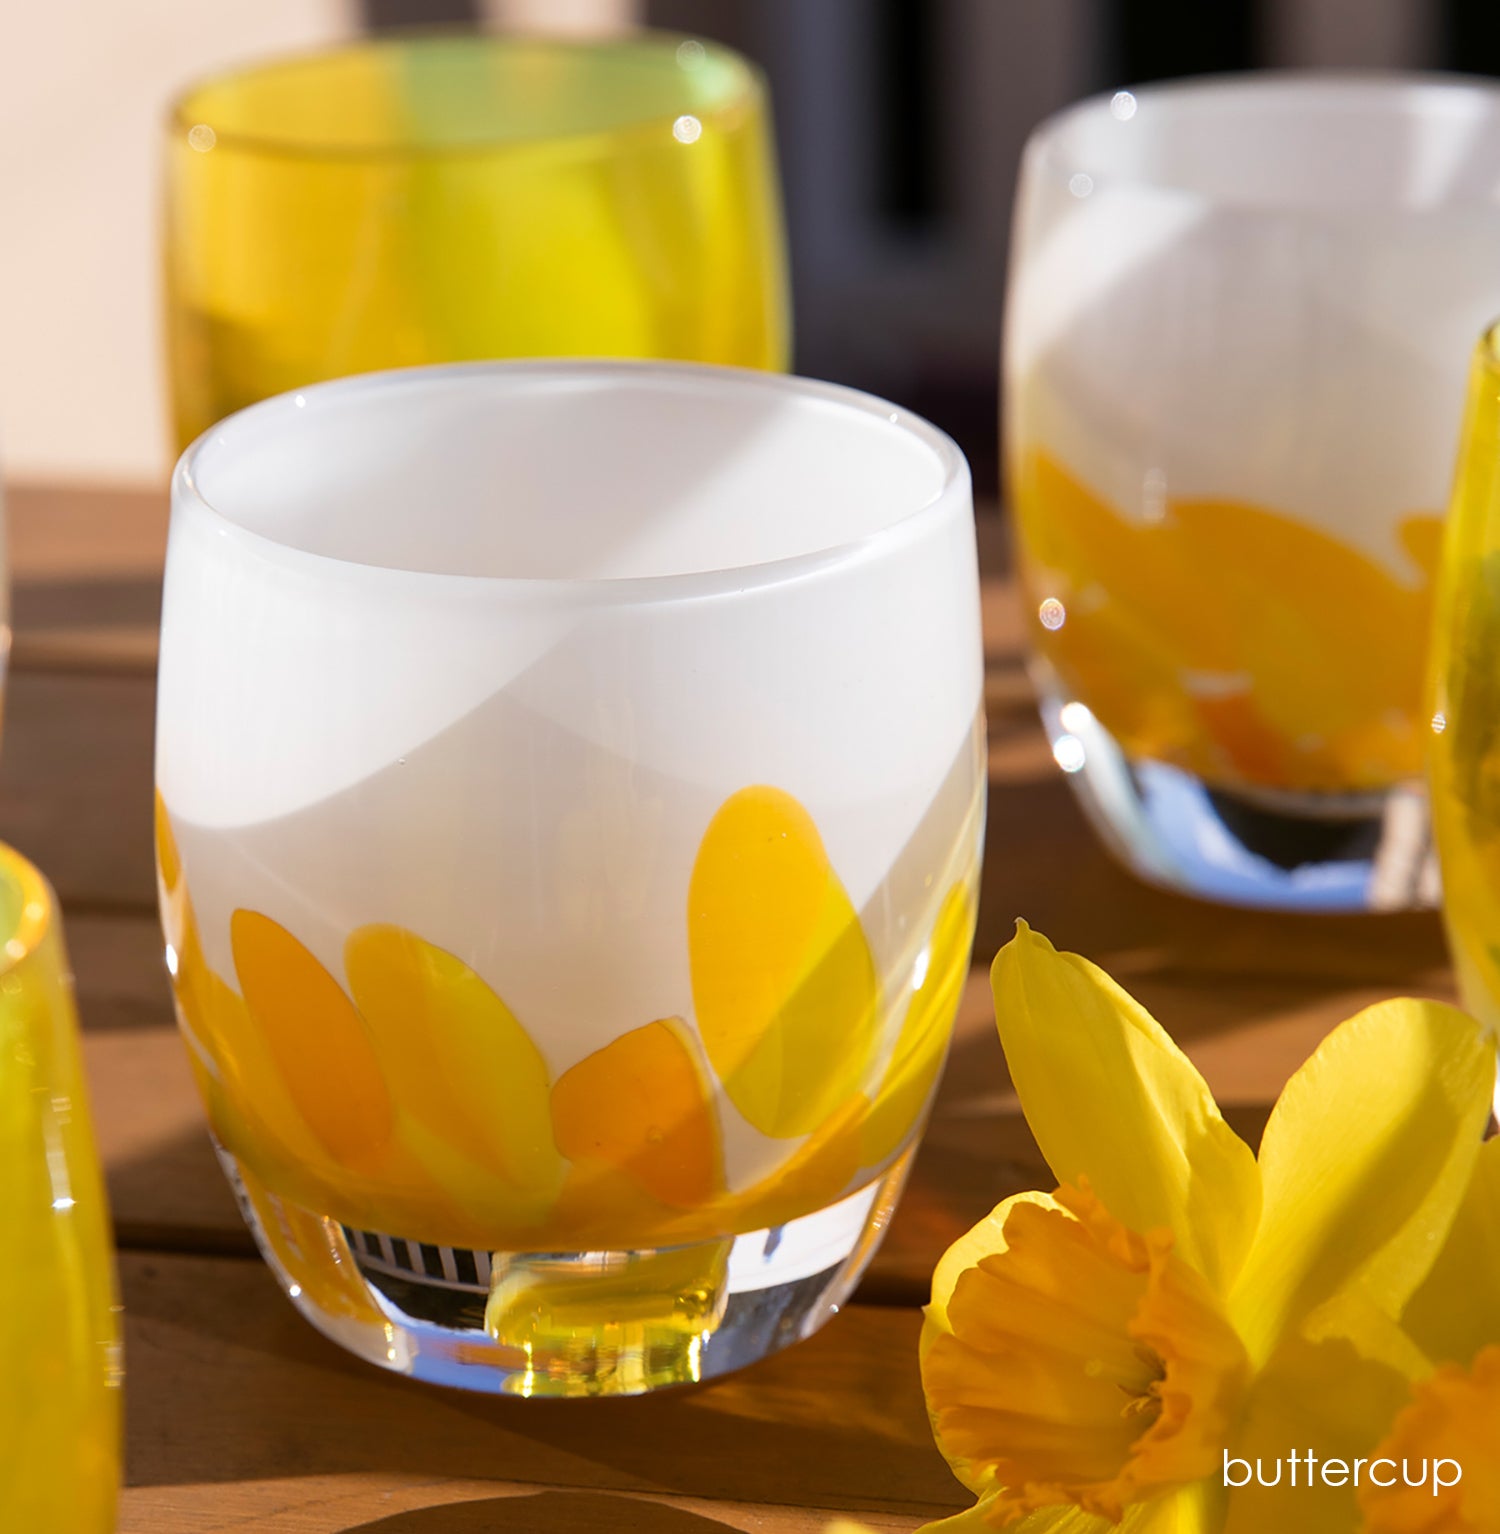 buttercup, yellow petals on white, hand-blown glass votive candle holders on a wood table with fresh daffodil flowers.